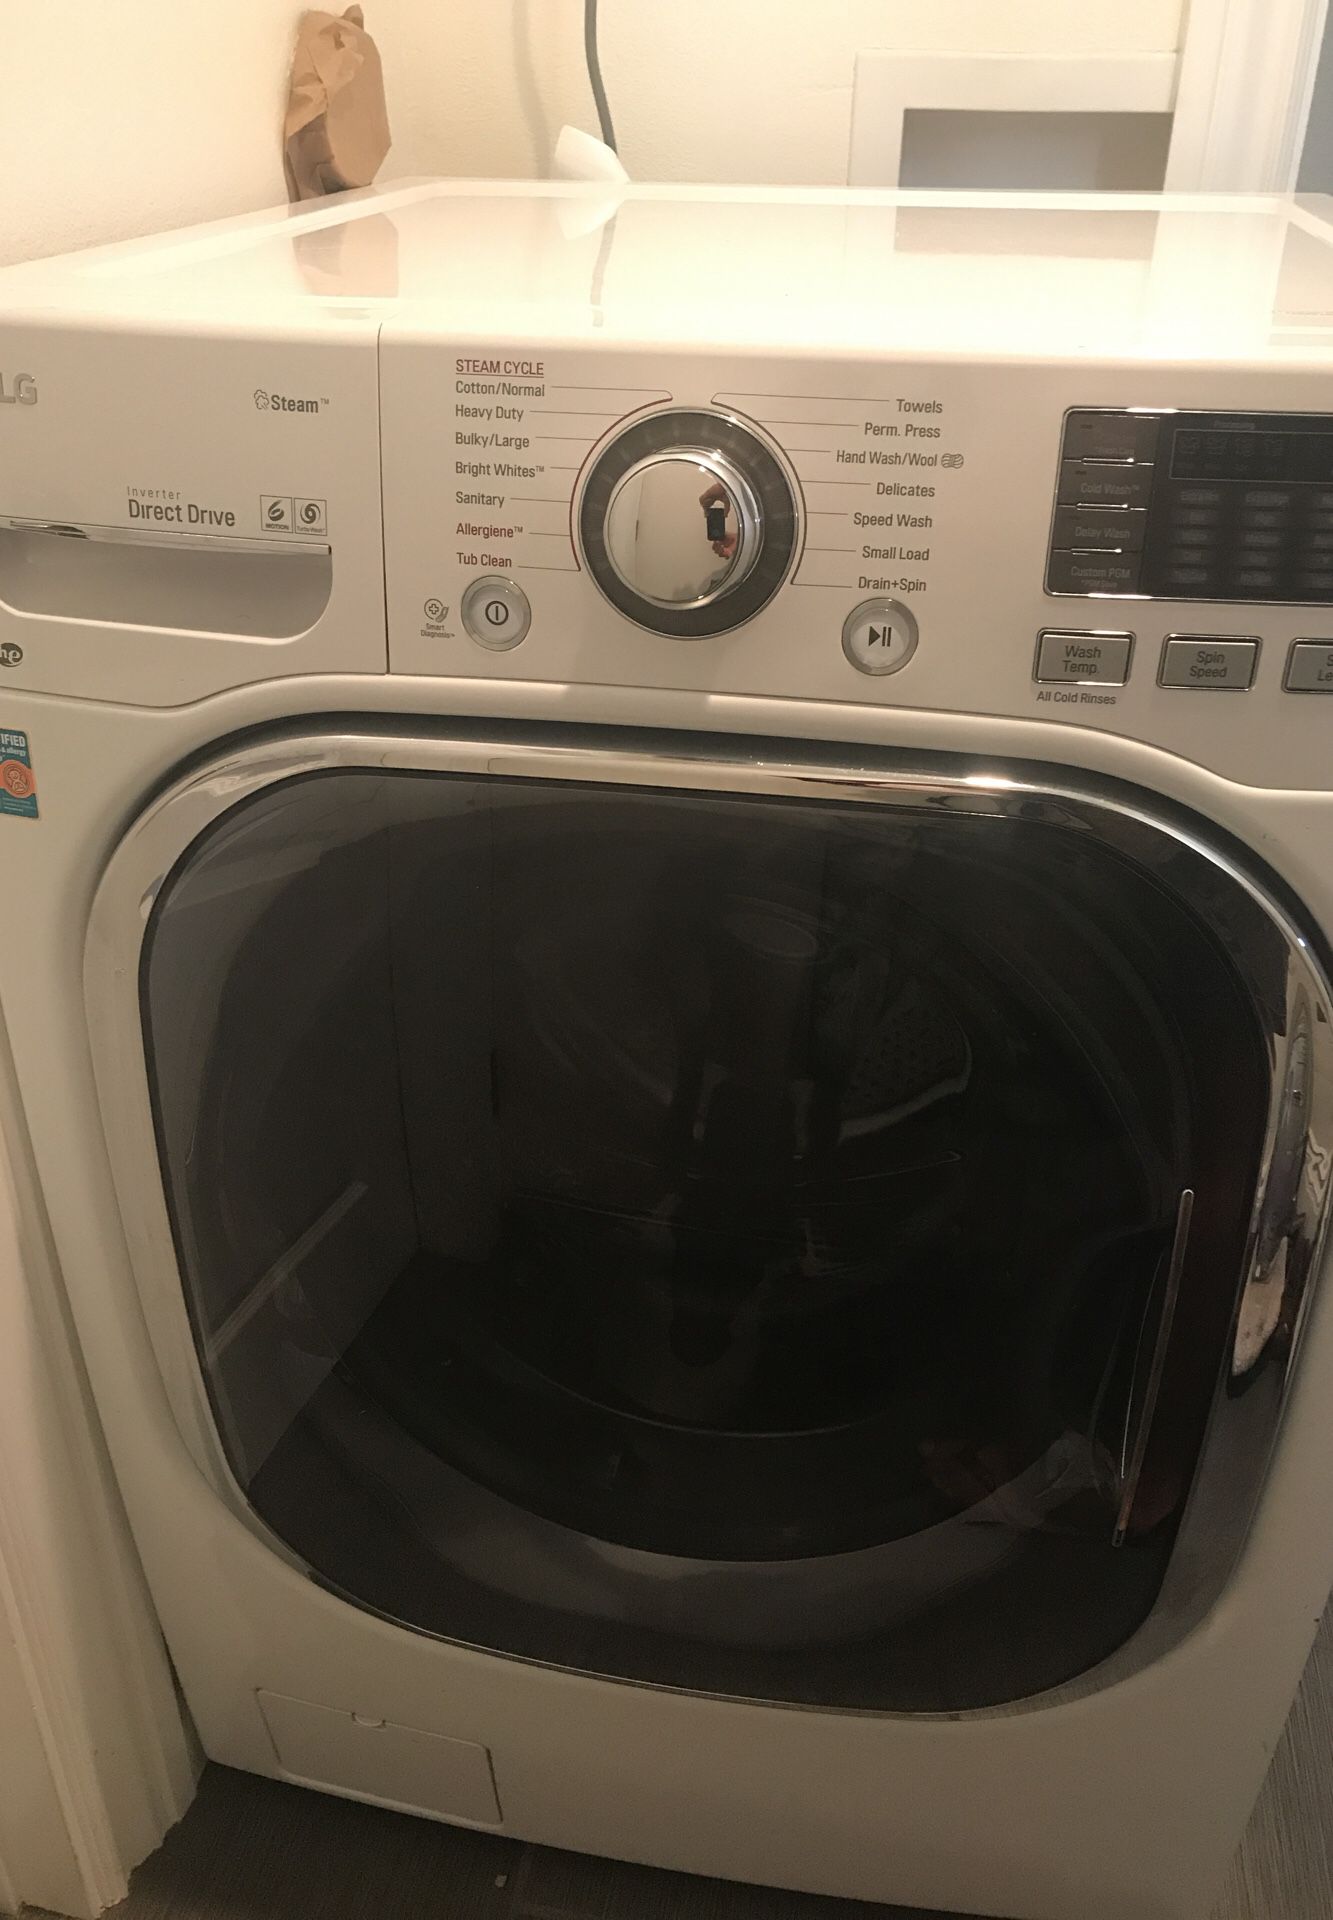 LG trueBalance washer dryer combo, he, asthma and allergy friendly, 10 year warranty on motor, 4 year warranty at Home Depot